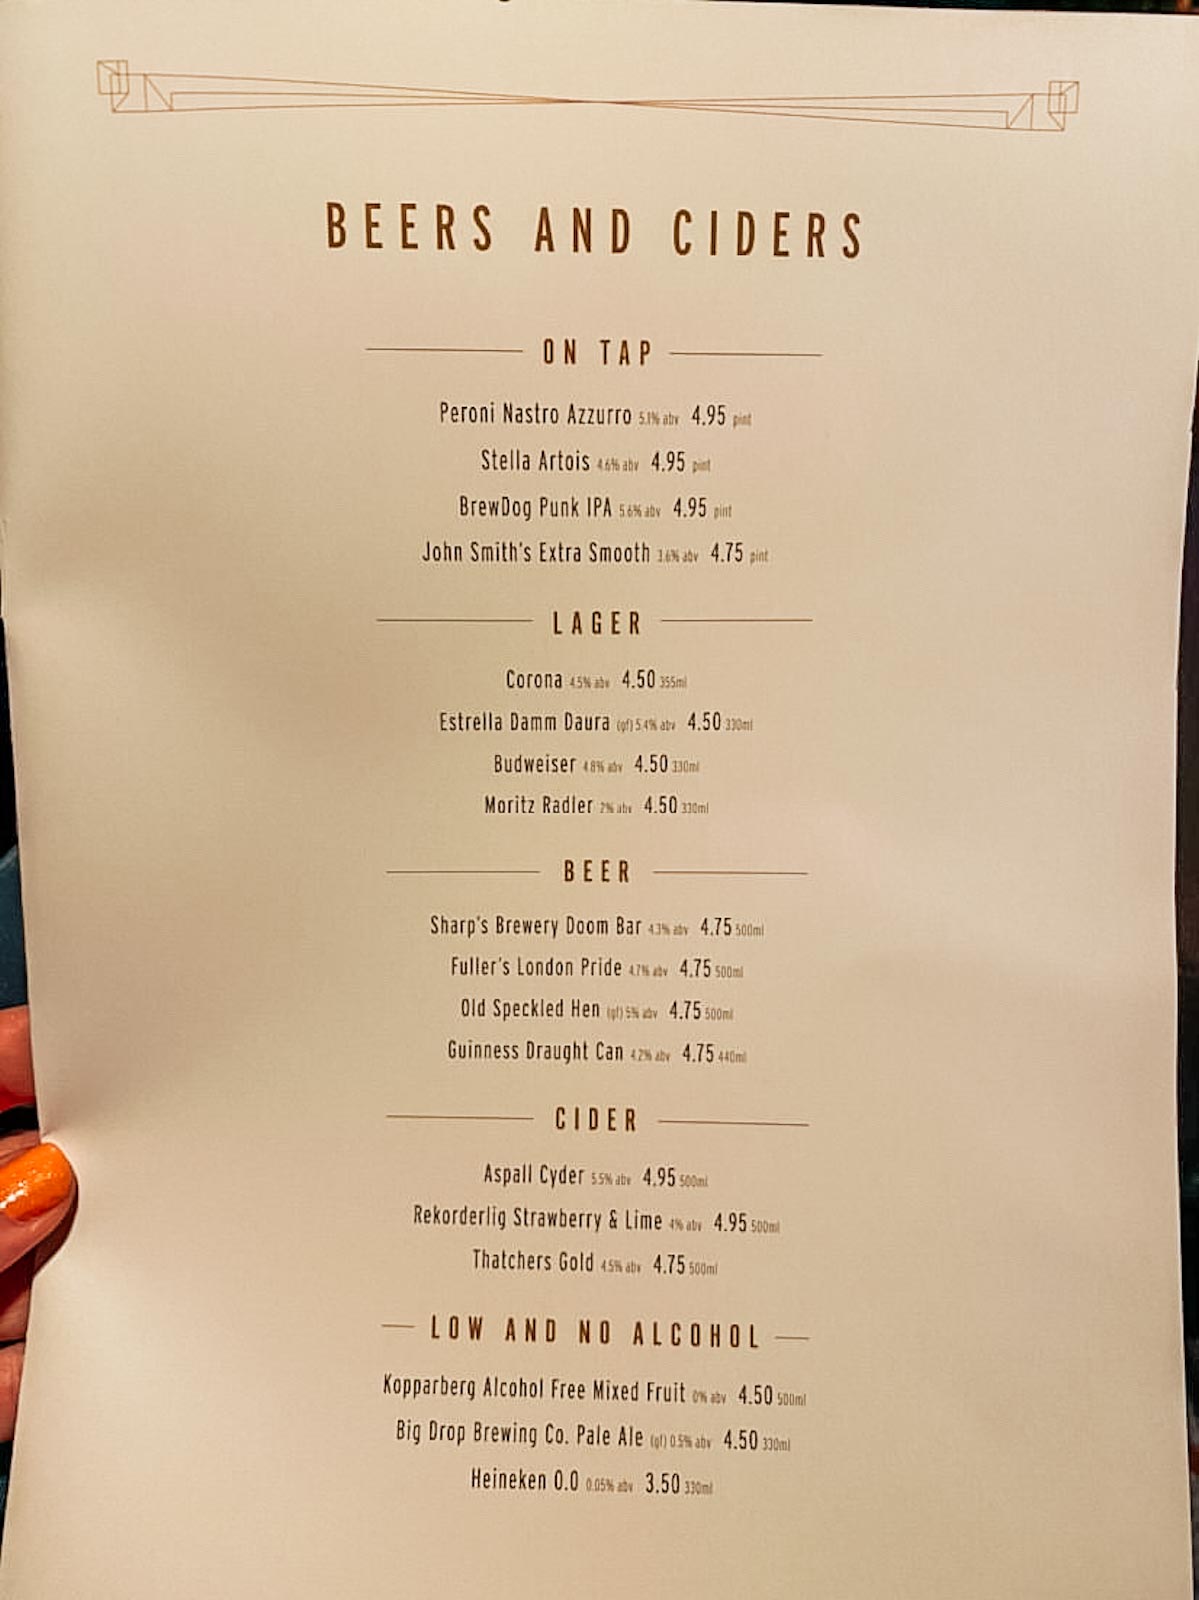 Beer And Cider menus and prices on 2021 sailings on P&O Cruises